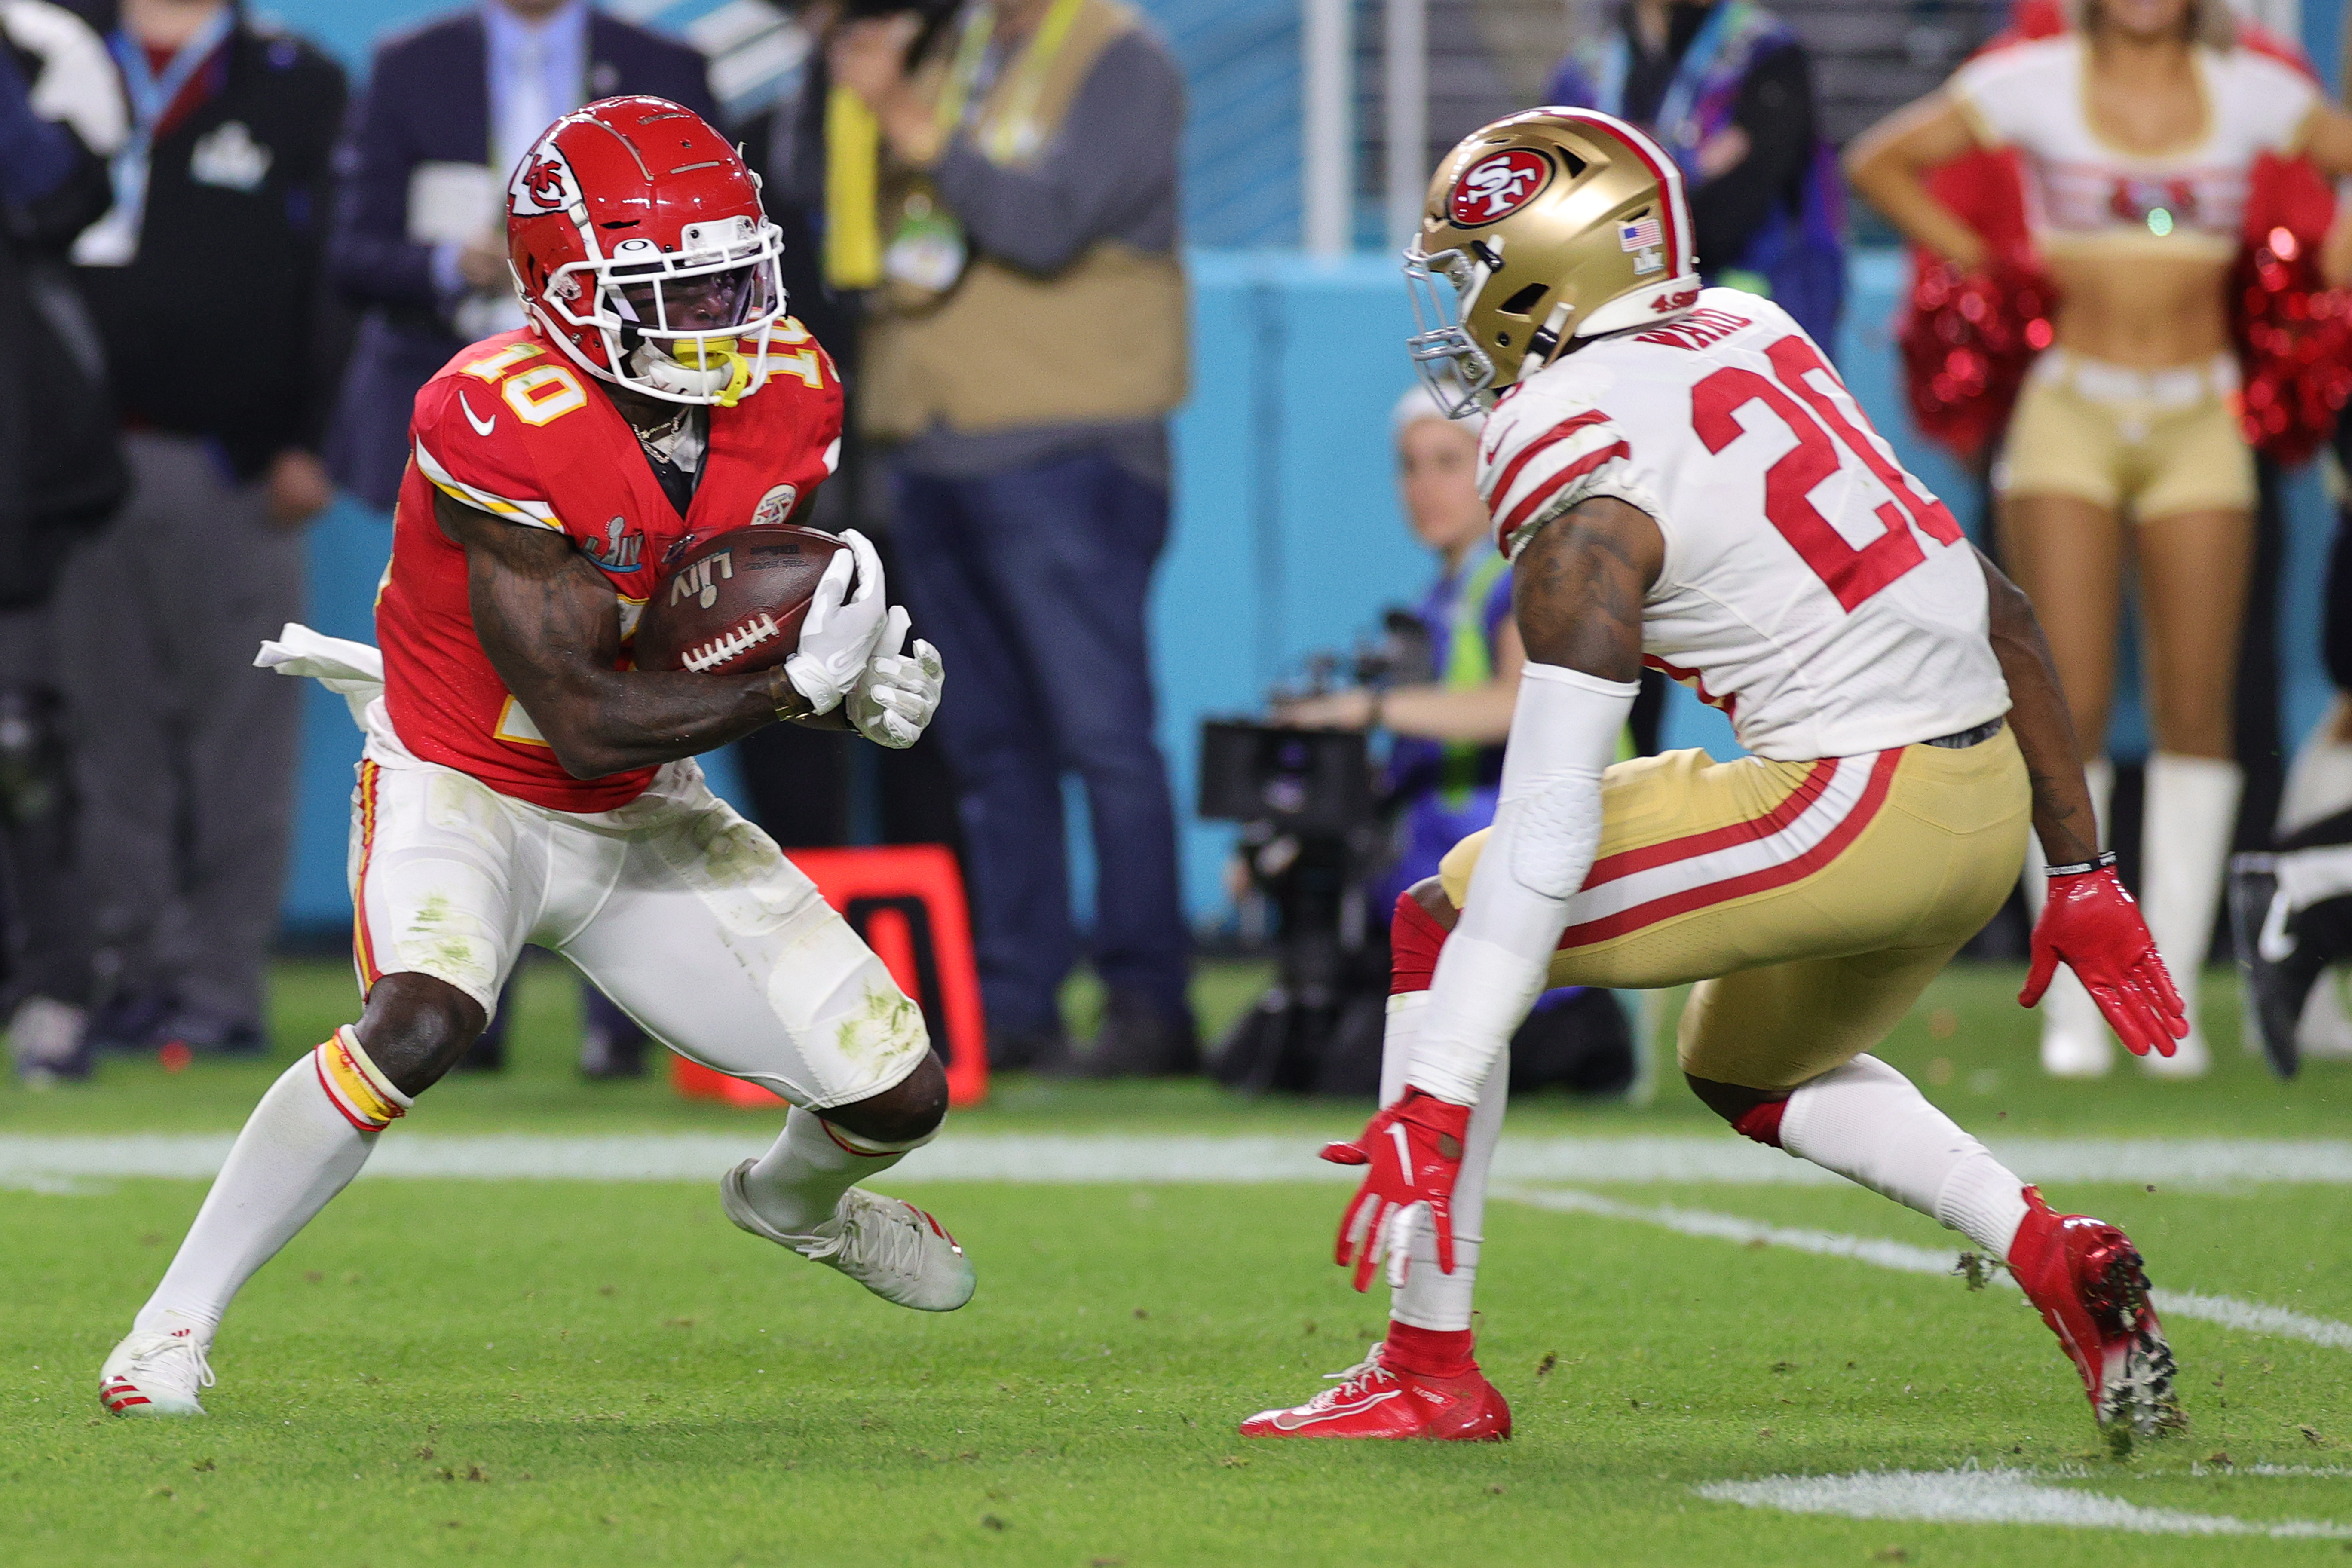 Wide receiver Tyreek Hill (L) of the Kansas City Chiefs tries to break the tackle of safety Jimmie Ward of the San Francisco 49ers in Supber LIV at Hard Rock Stadium in Miami Gardens, Florida, U.S., February 2, 2020. /CFP